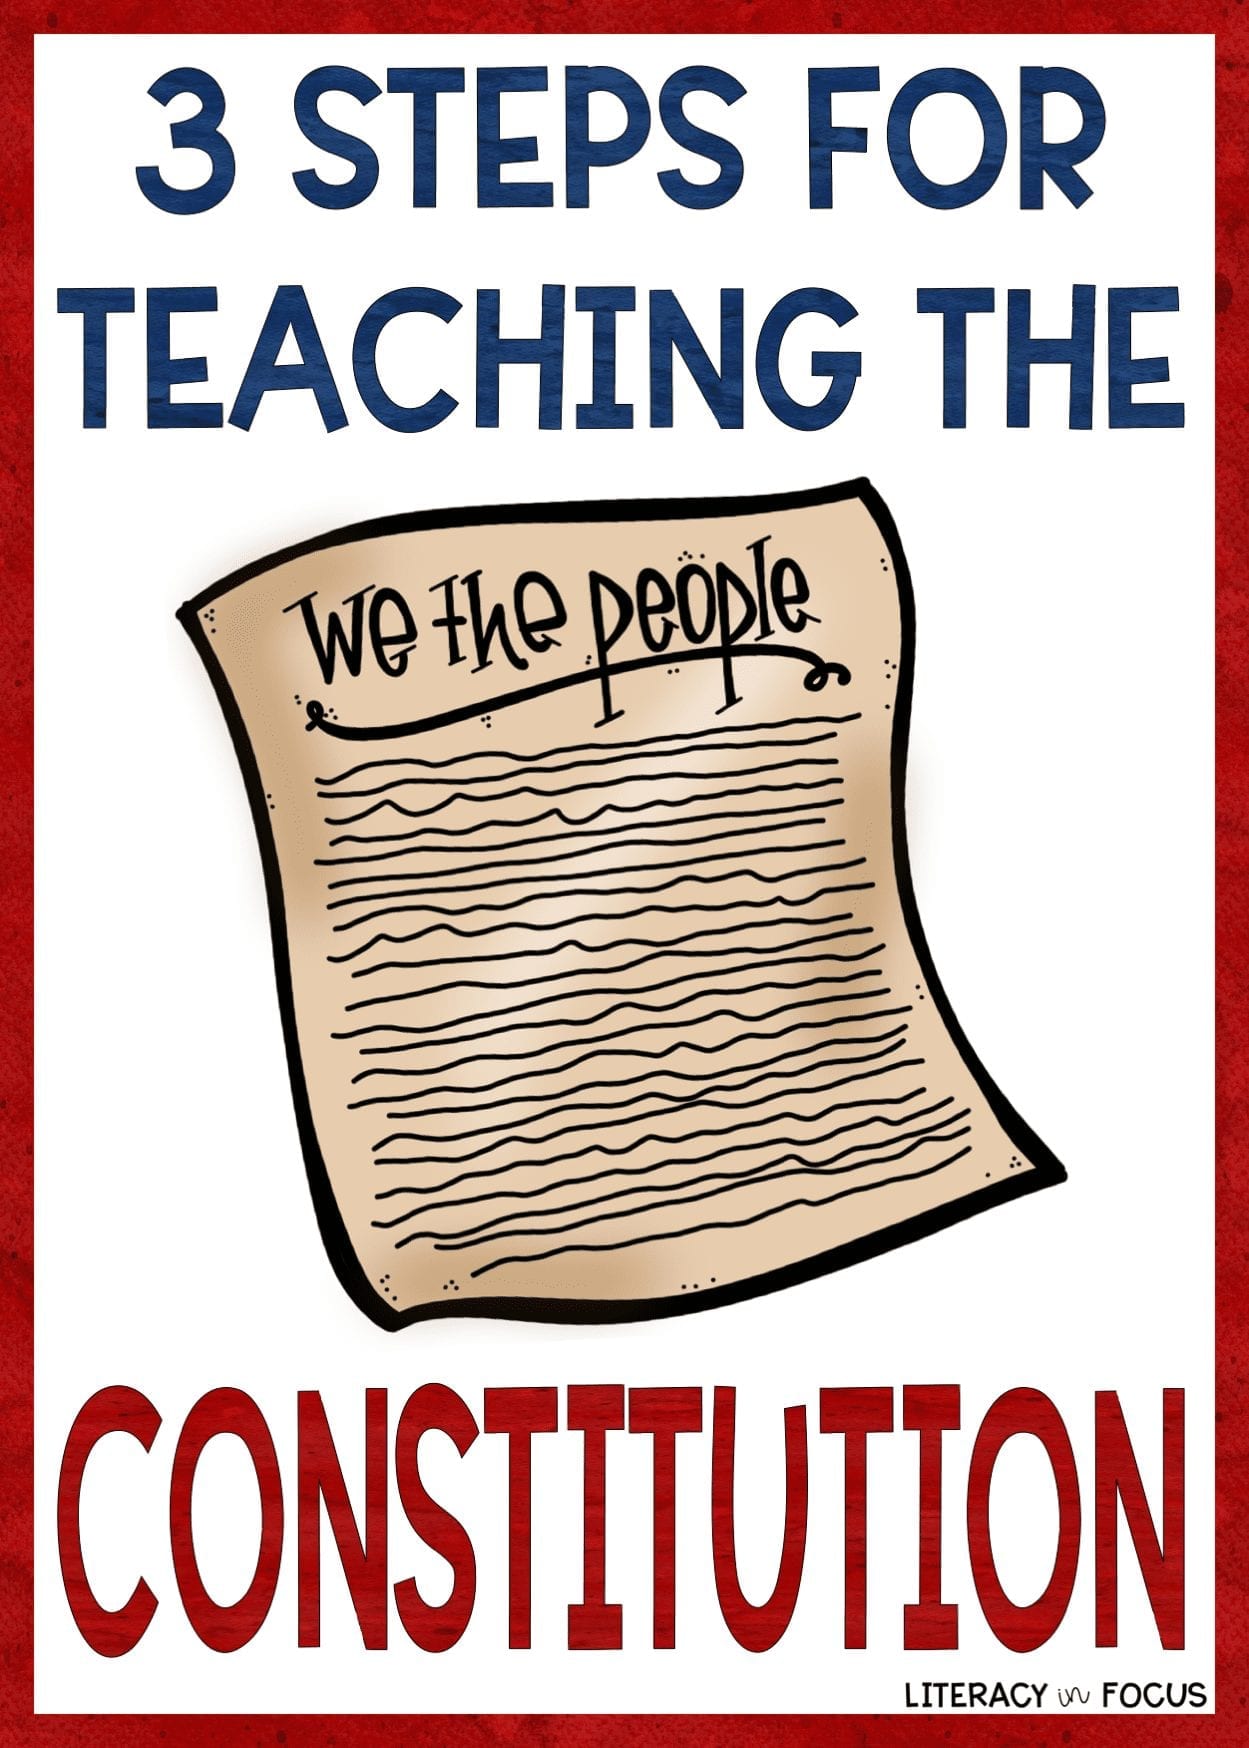 3 Steps for Teaching the Constitution